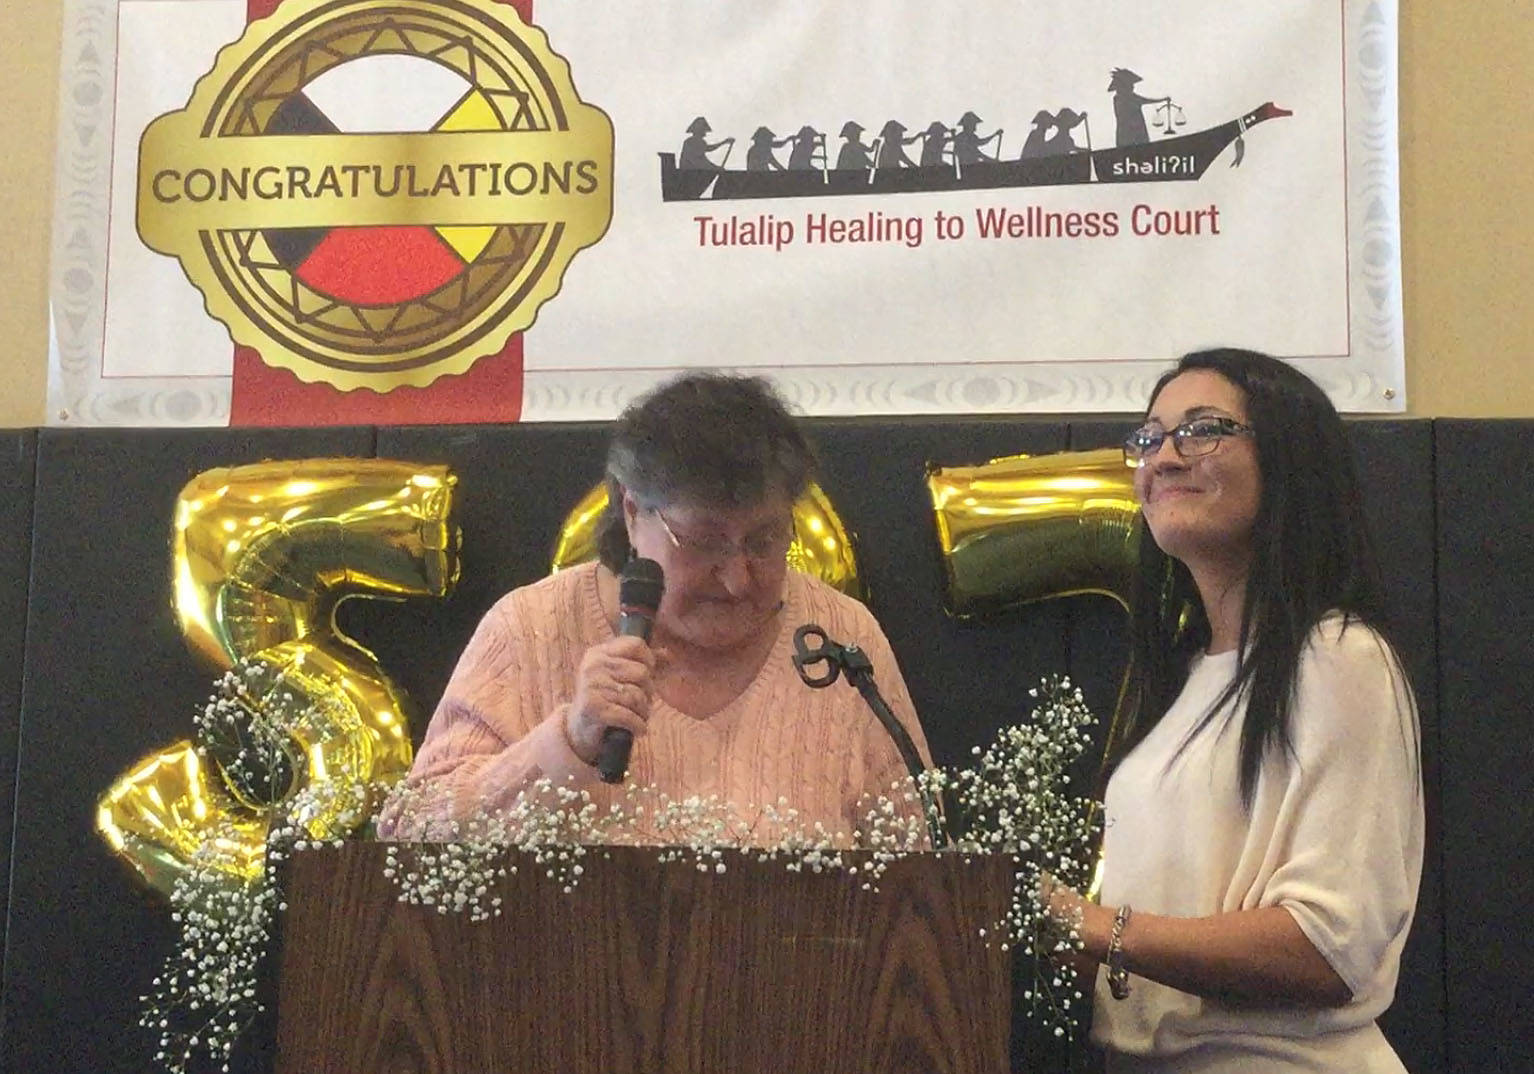 Summerlee Blankenship holds her head high after becoming the first woman to graduate from the Tulalip Tribes’ Healing to Wellness Court. Grandmother Donna Paul was one of several family members and friends to congratulate Blankenship on 537 days of sobriety completing the Wellness Court. Inset left, she received a hand-carved mask titled “A Sacred Journey.”